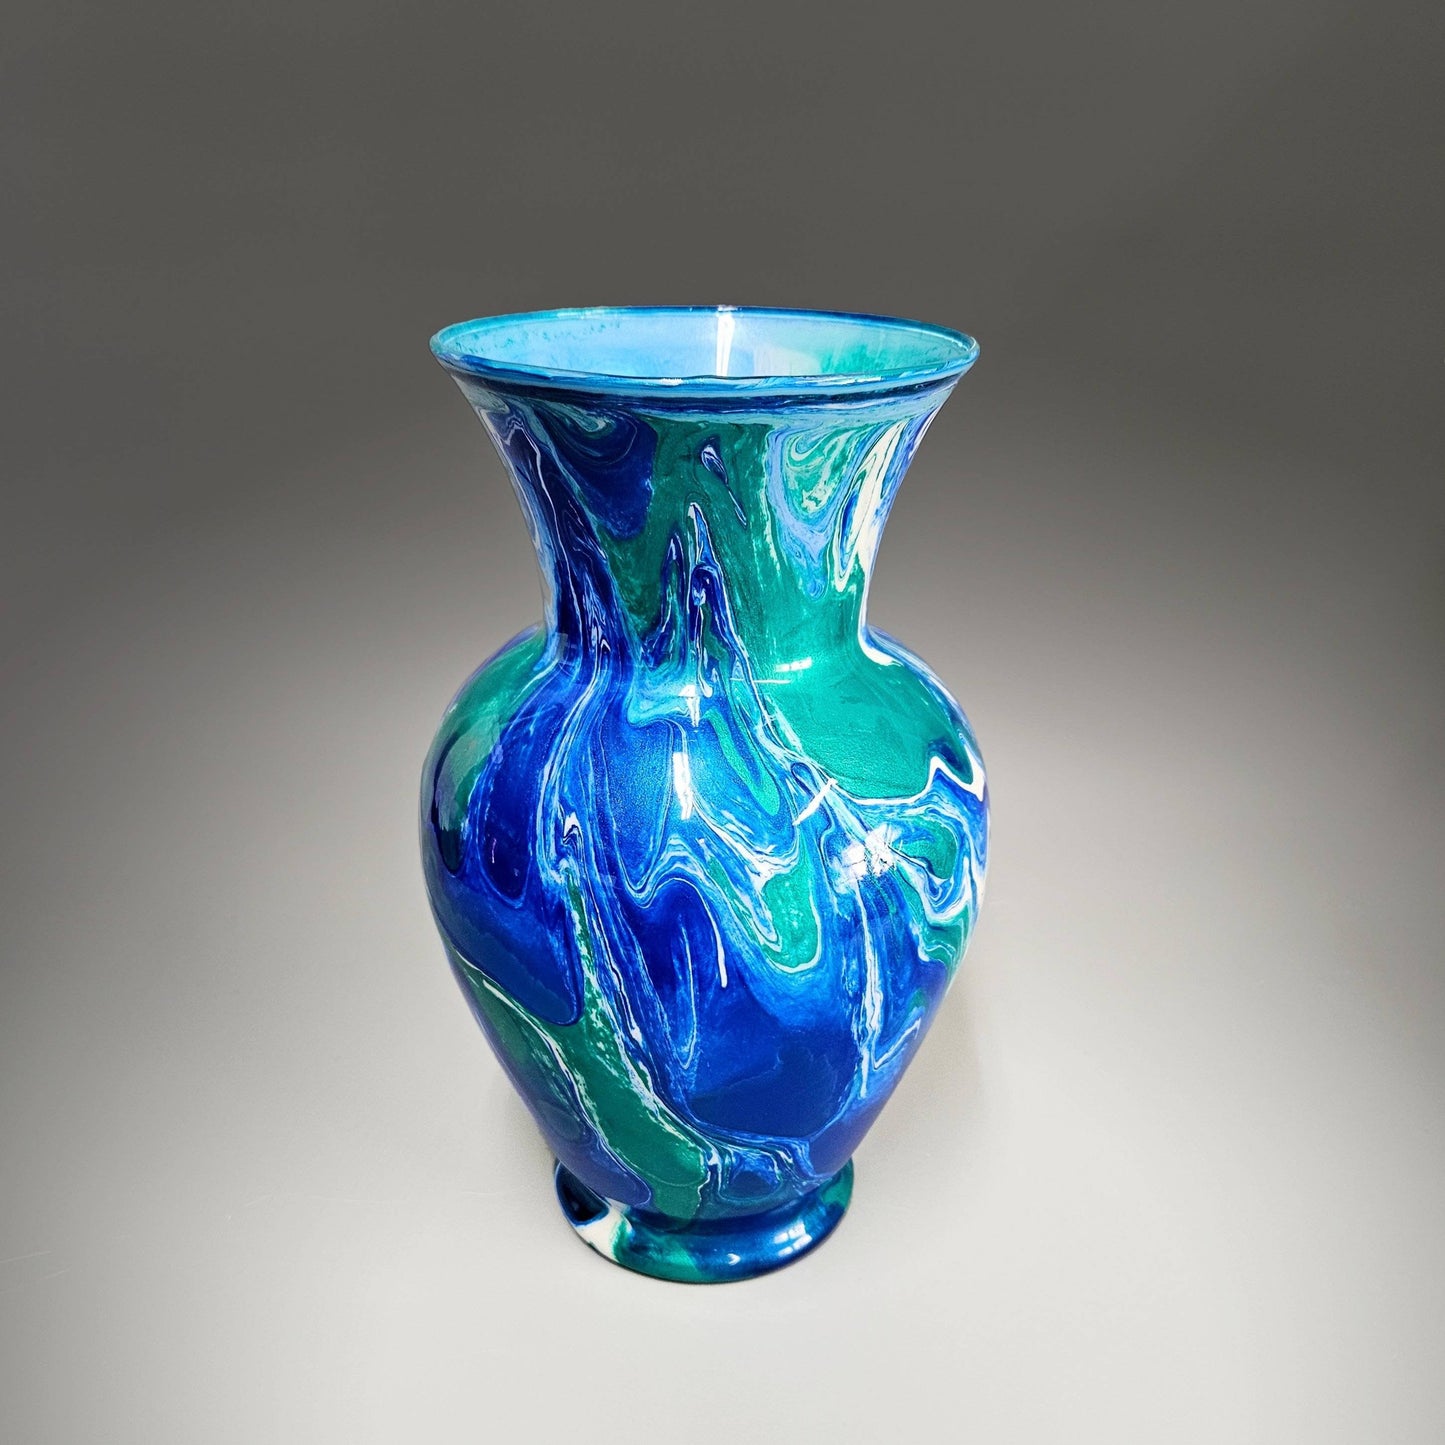 Glass Art Painted Vase in Teal Aqua Turquoise and Navy